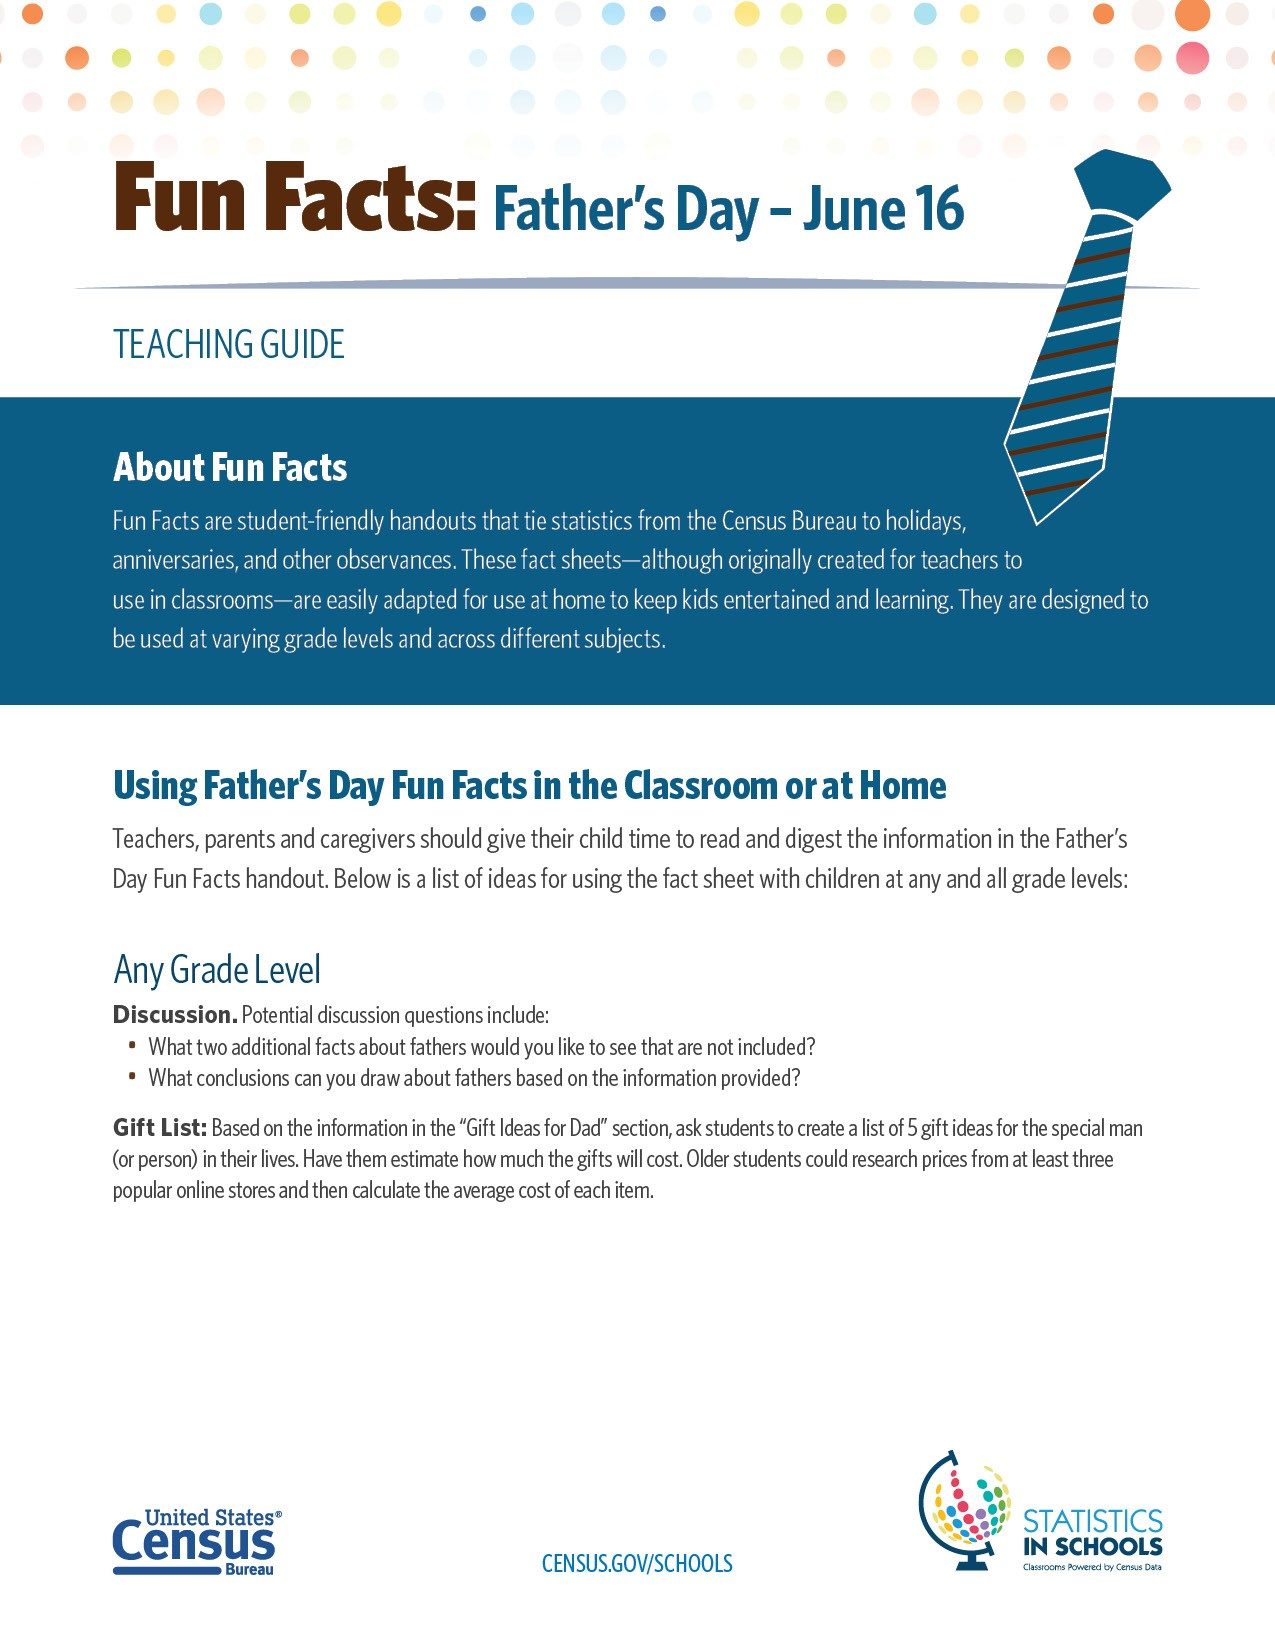 father-s-day-fun-facts